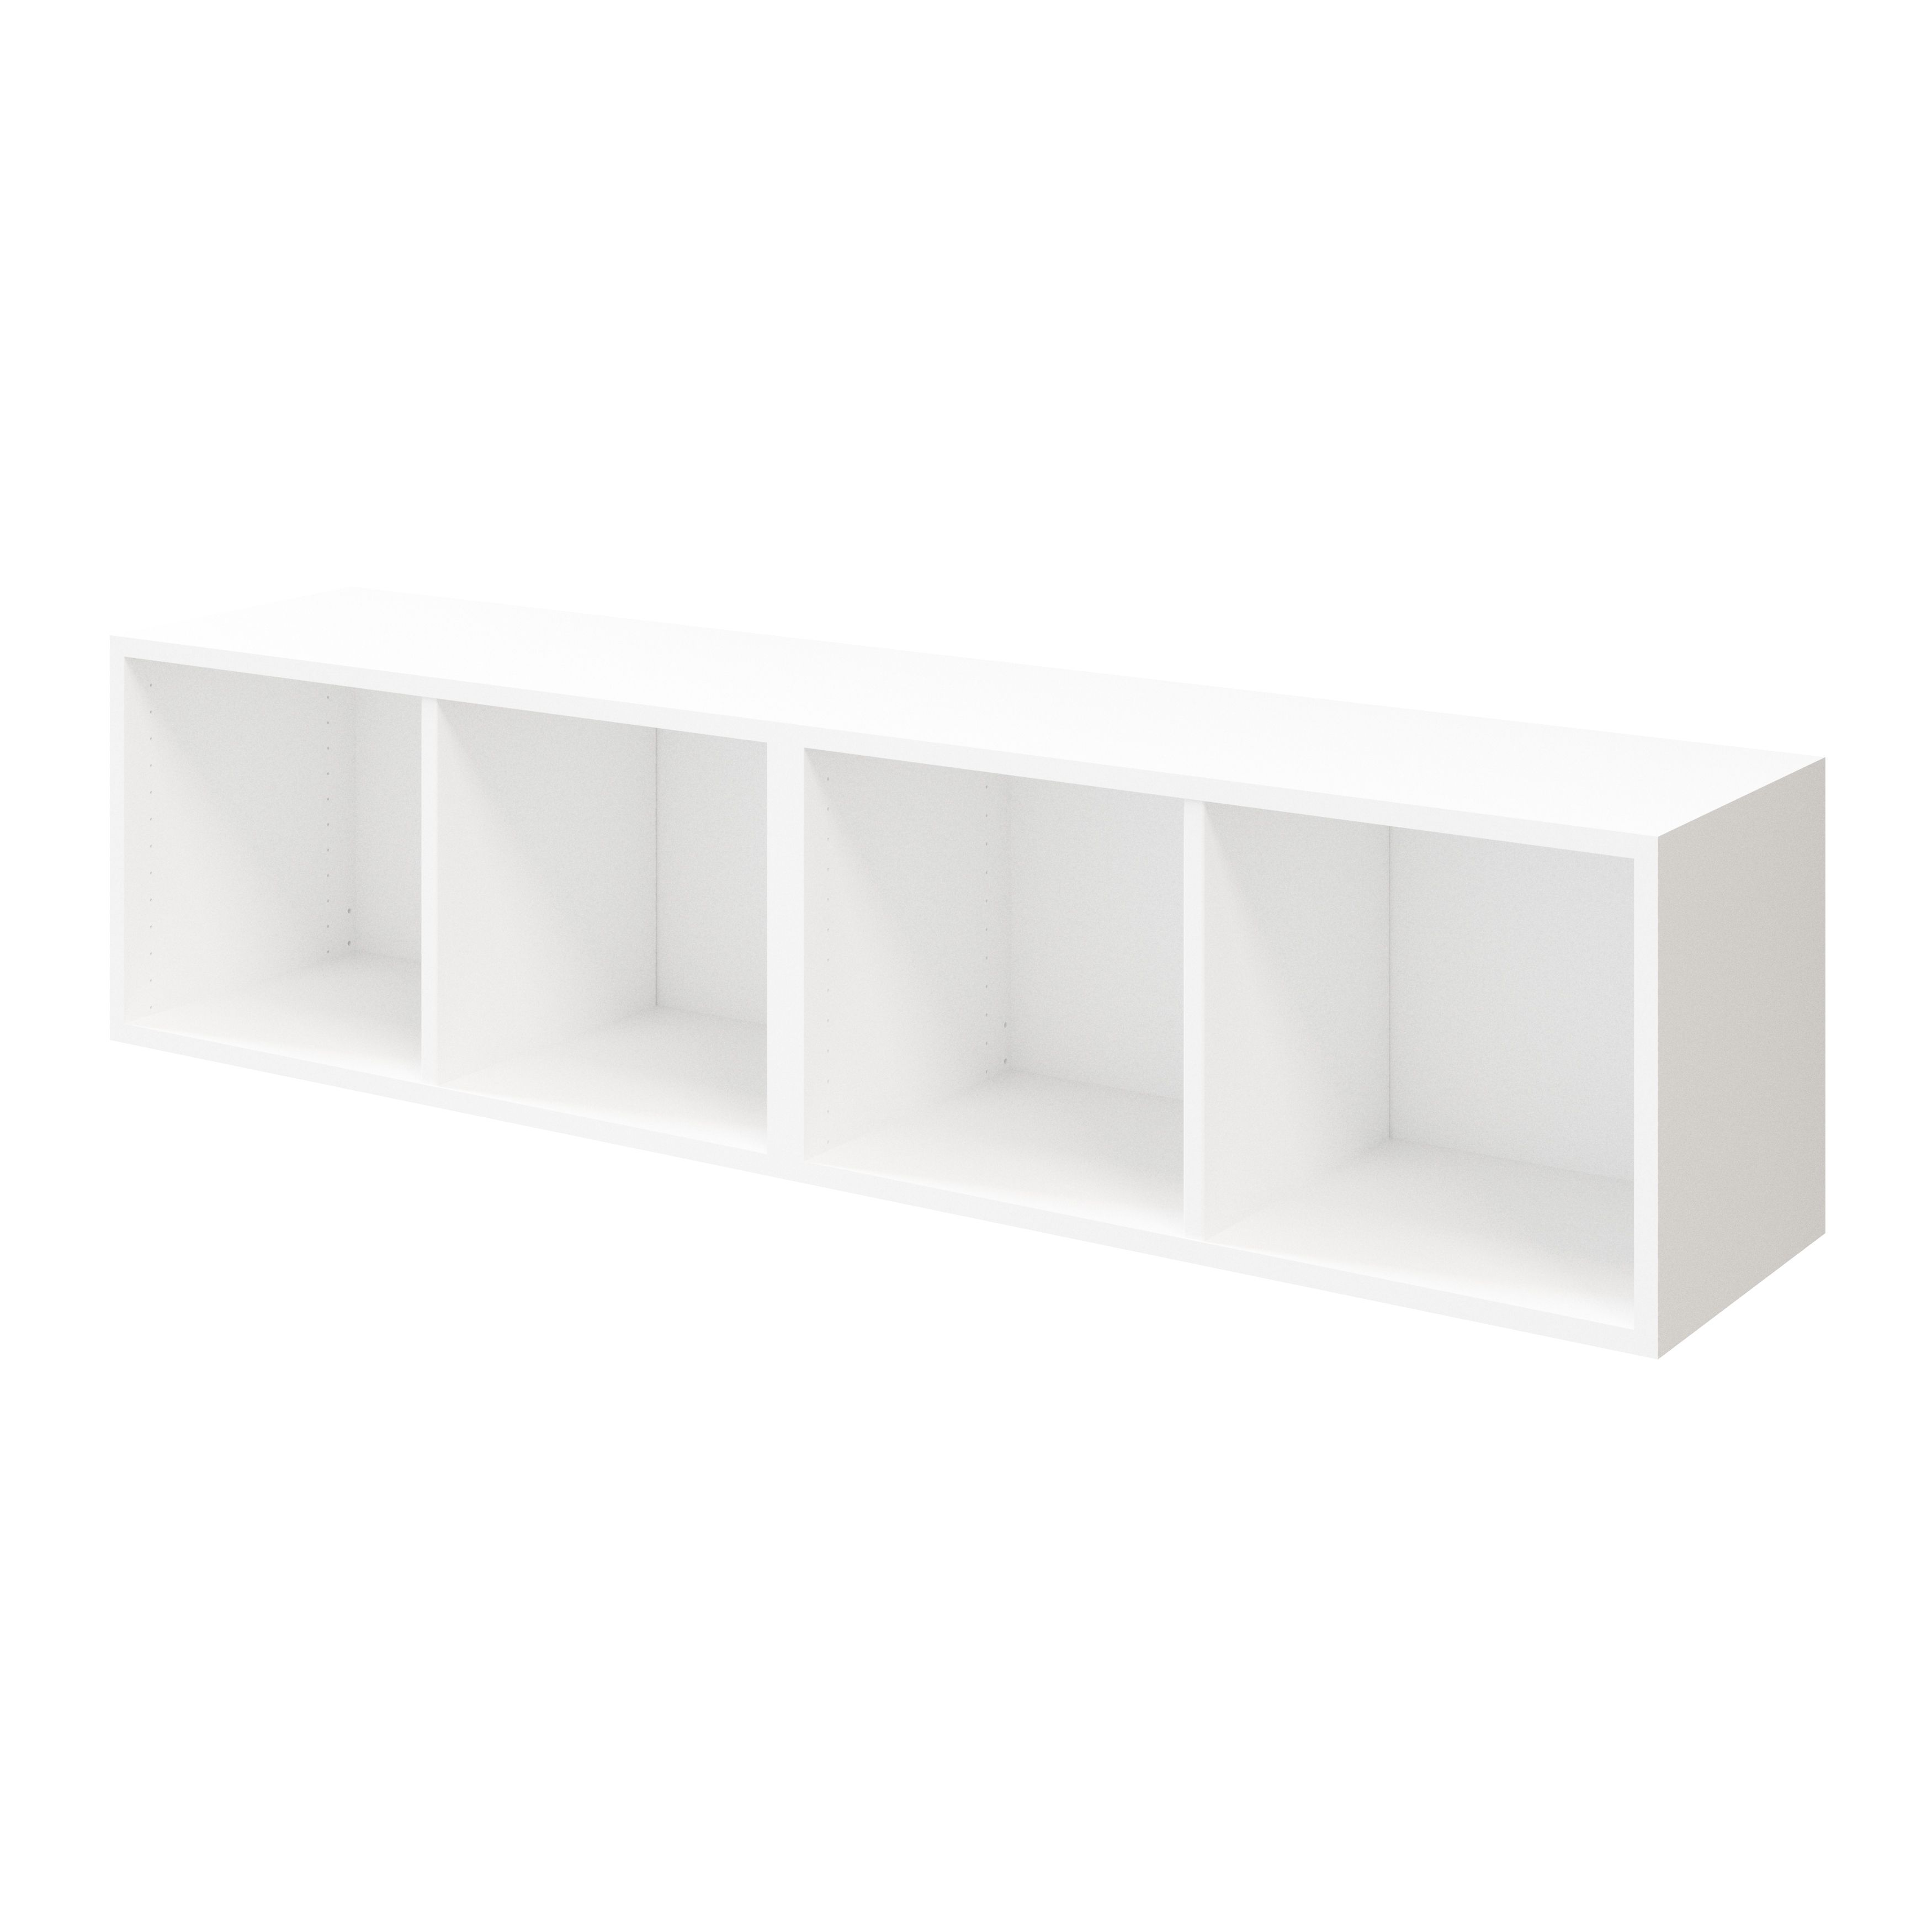 GoodHome Atomia Freestanding White Medium Bookcases, shelving units & display cabinets (H)375mm